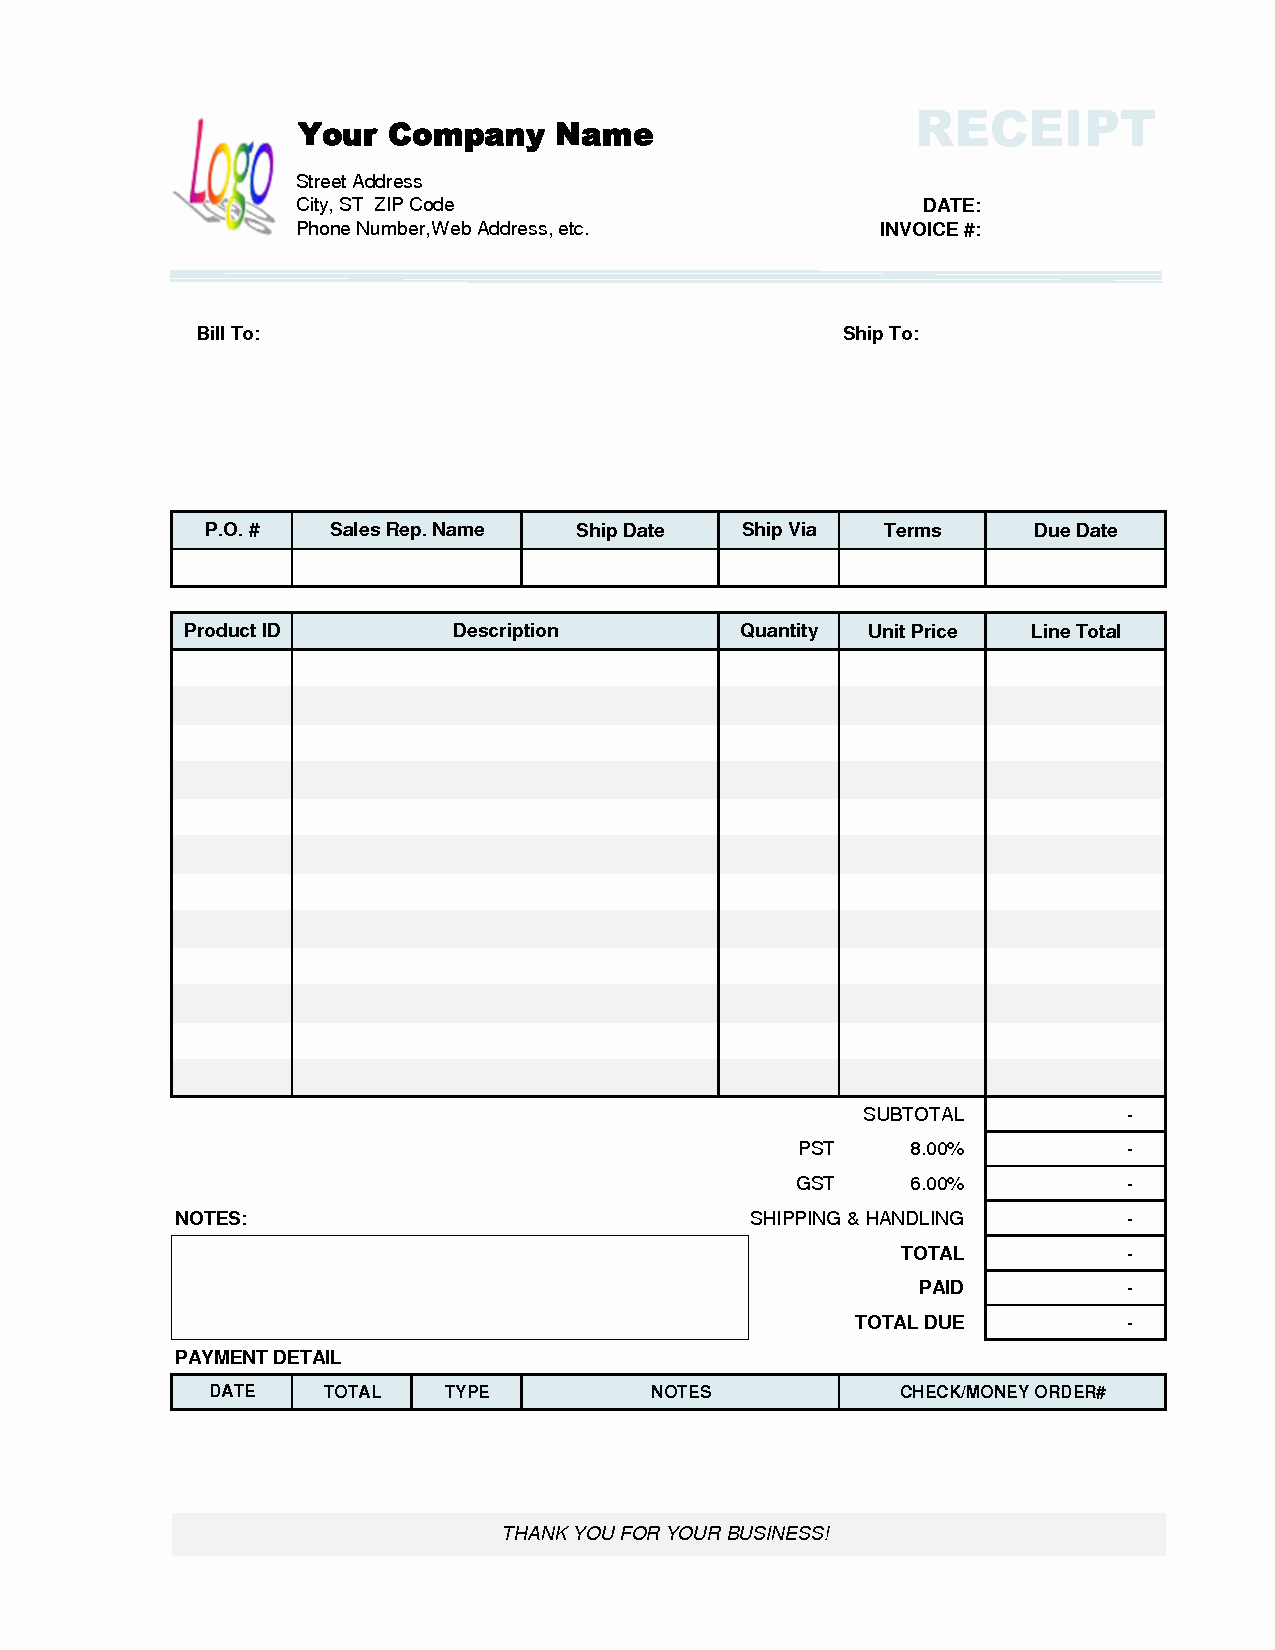 Free Receipt Template Pdf Lovely Receipt Invoice Template